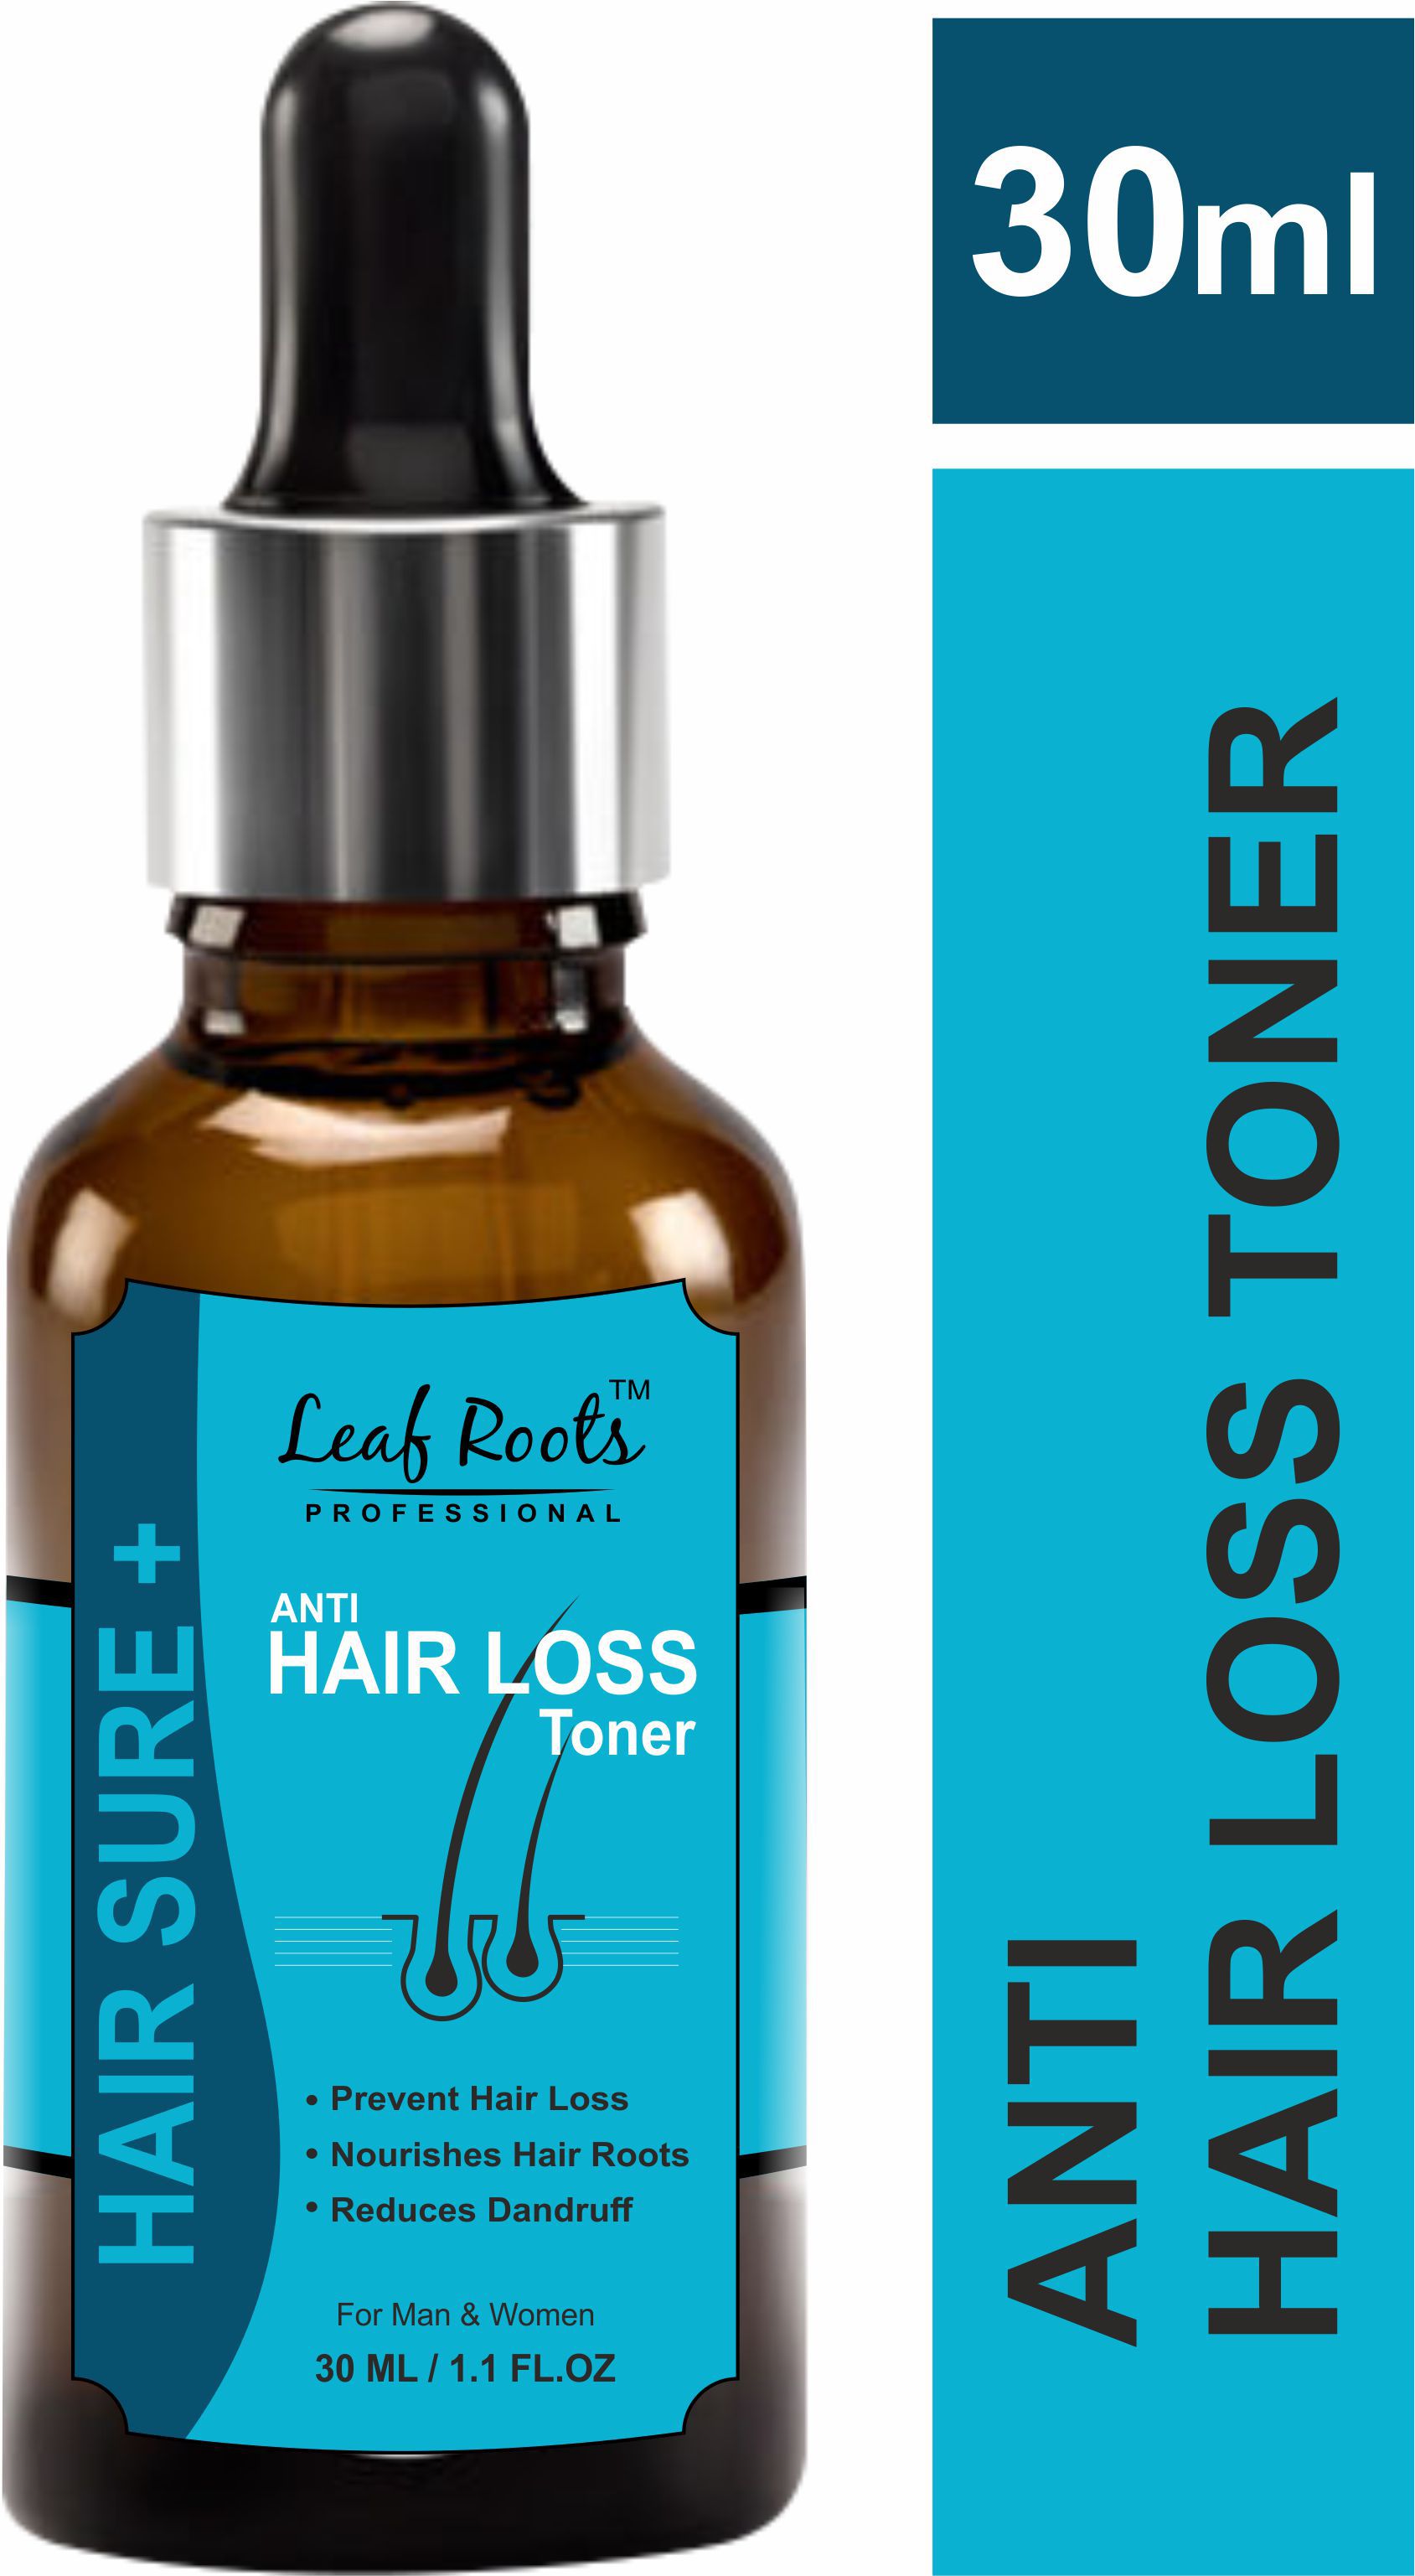 LEAF ROOTS PROFESSIONAL HAIR SURE + ANTI HAIR LOSS TONER (30 ML): Buy LEAF  ROOTS PROFESSIONAL HAIR SURE + ANTI HAIR LOSS TONER (30 ML) at Best Prices  in India - Snapdeal